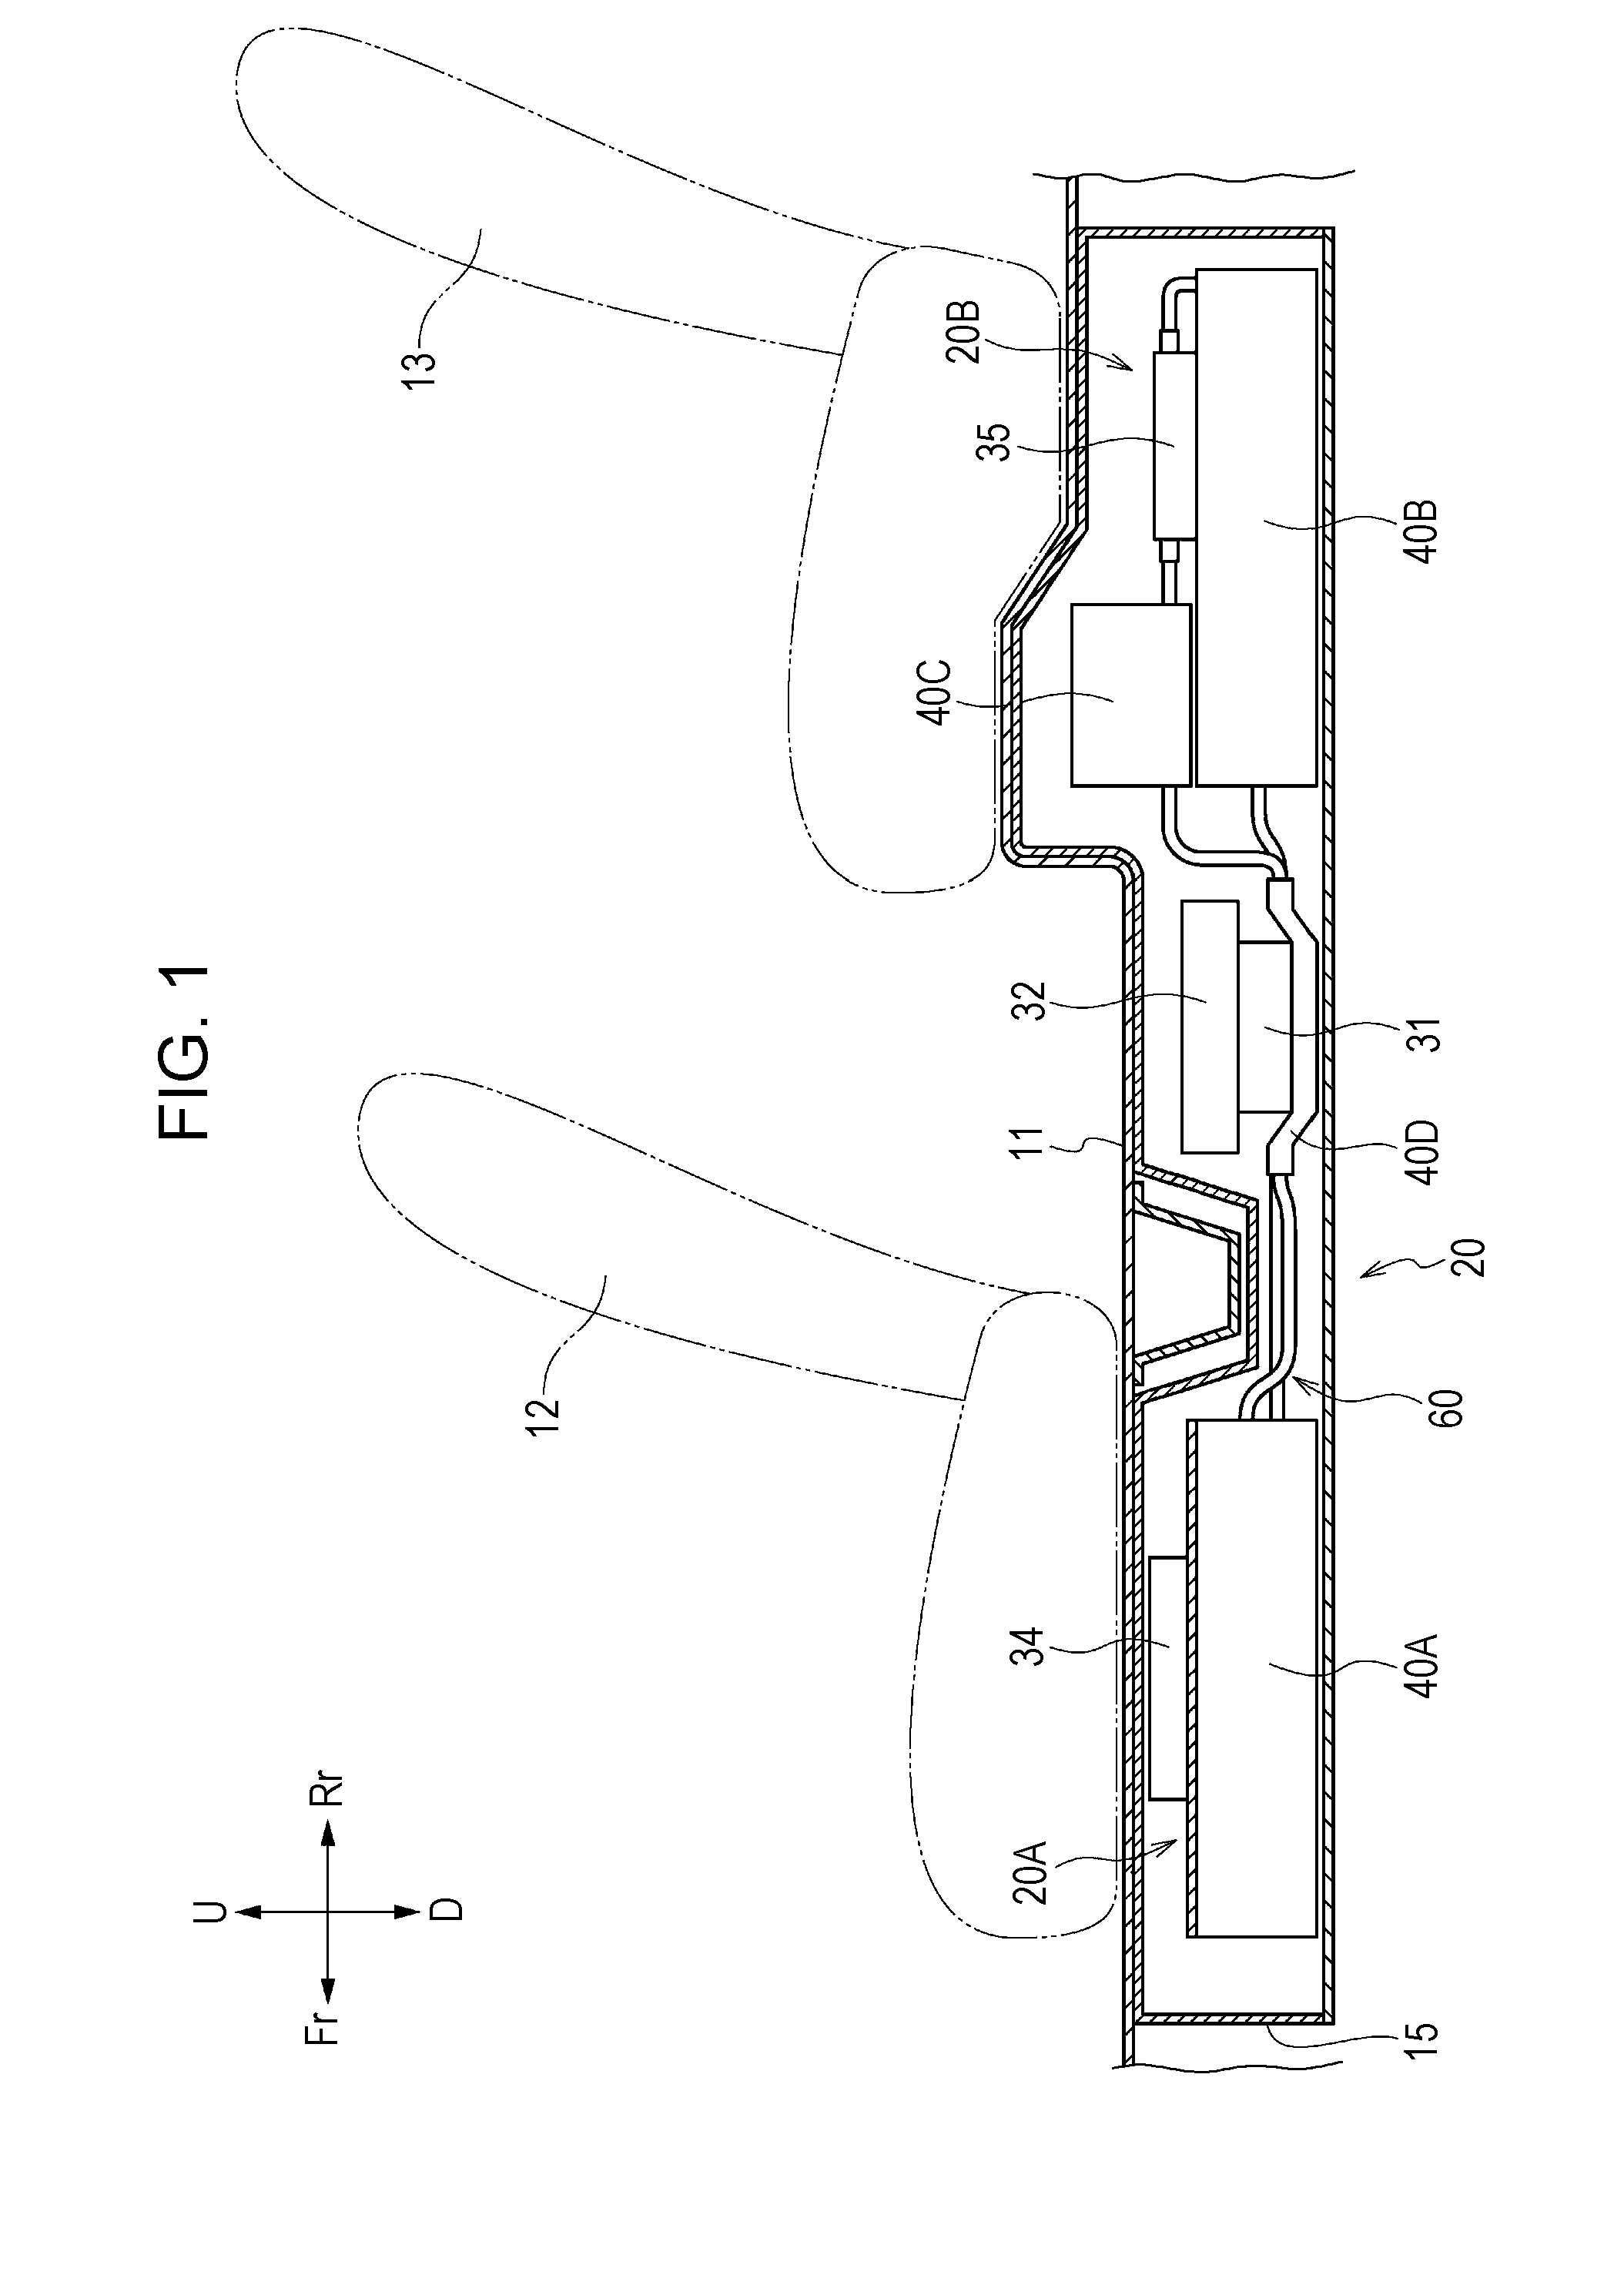 Vehicle battery unit and harness holder